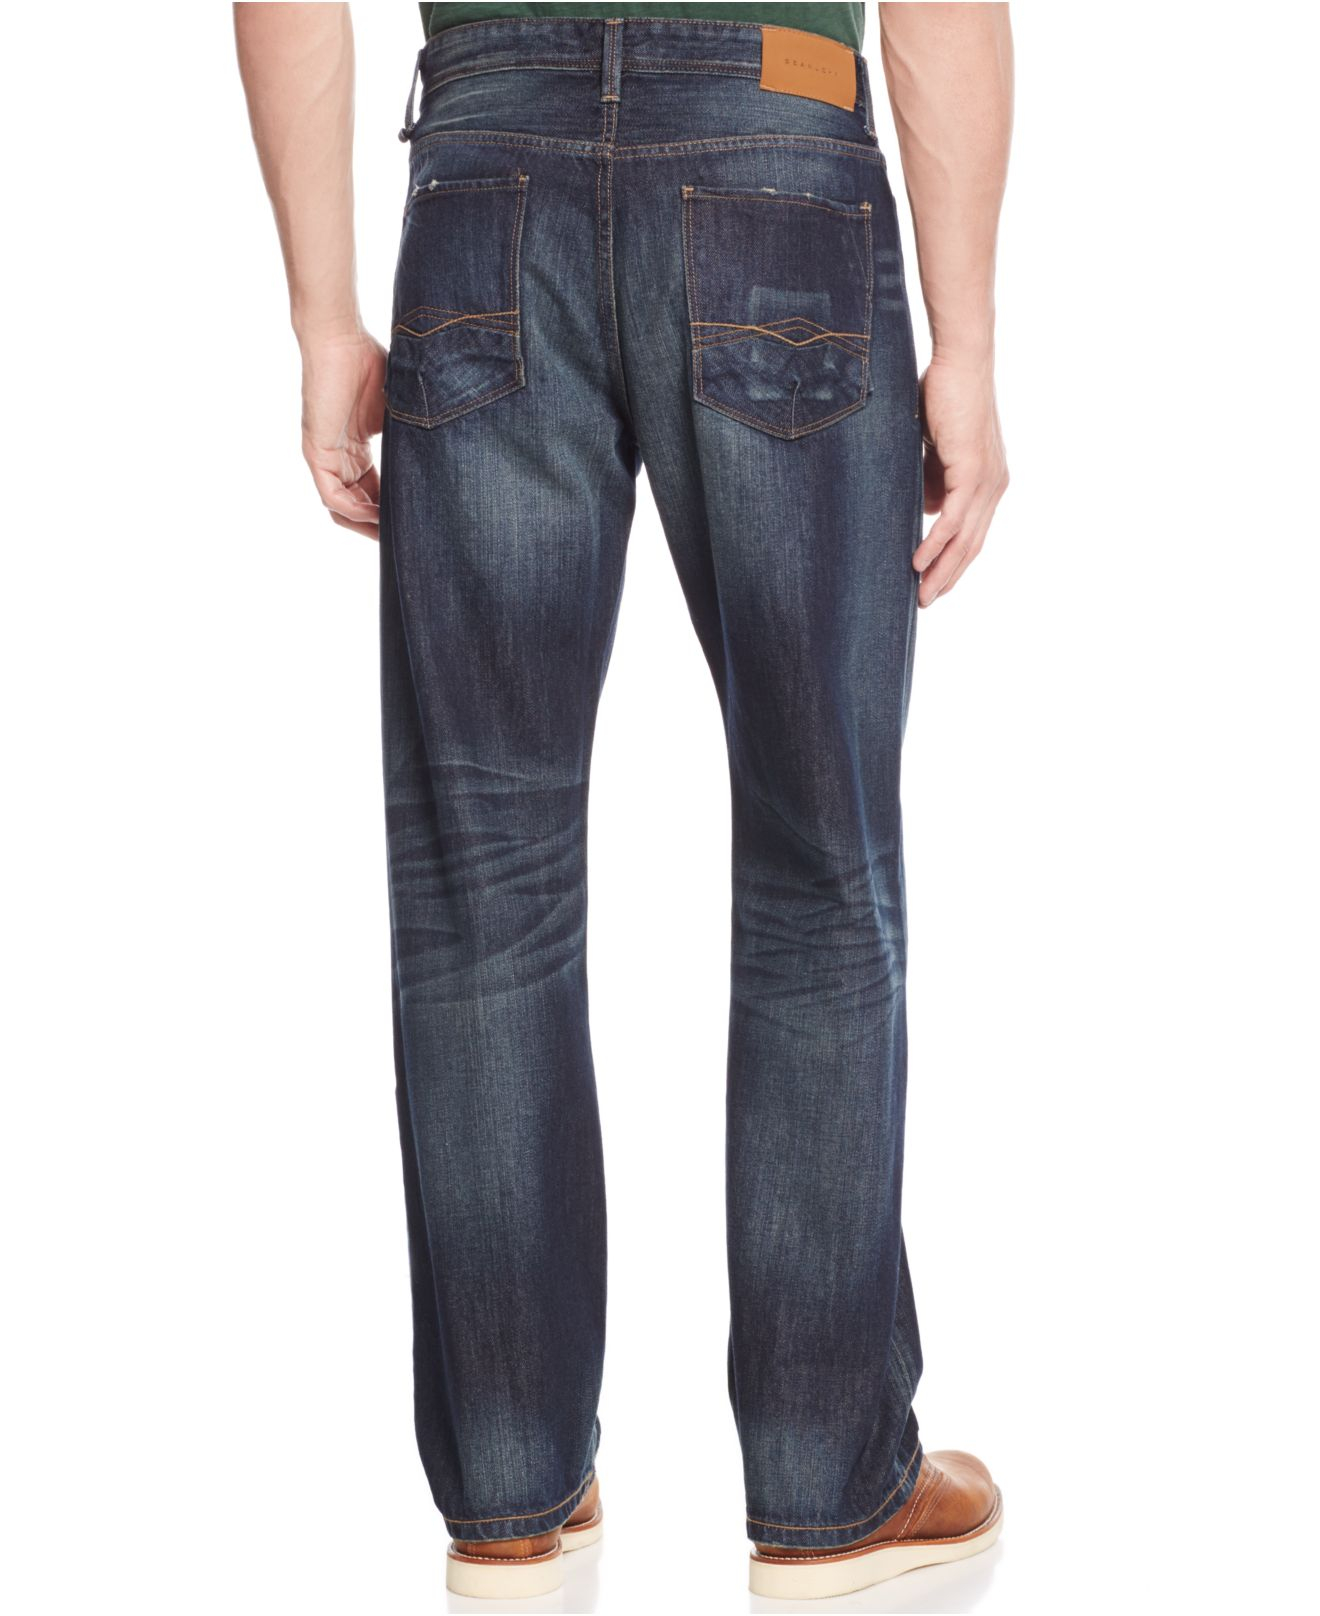 Lyst - Sean John Relaxed-fit Dark-wash Jeans in Blue for Men